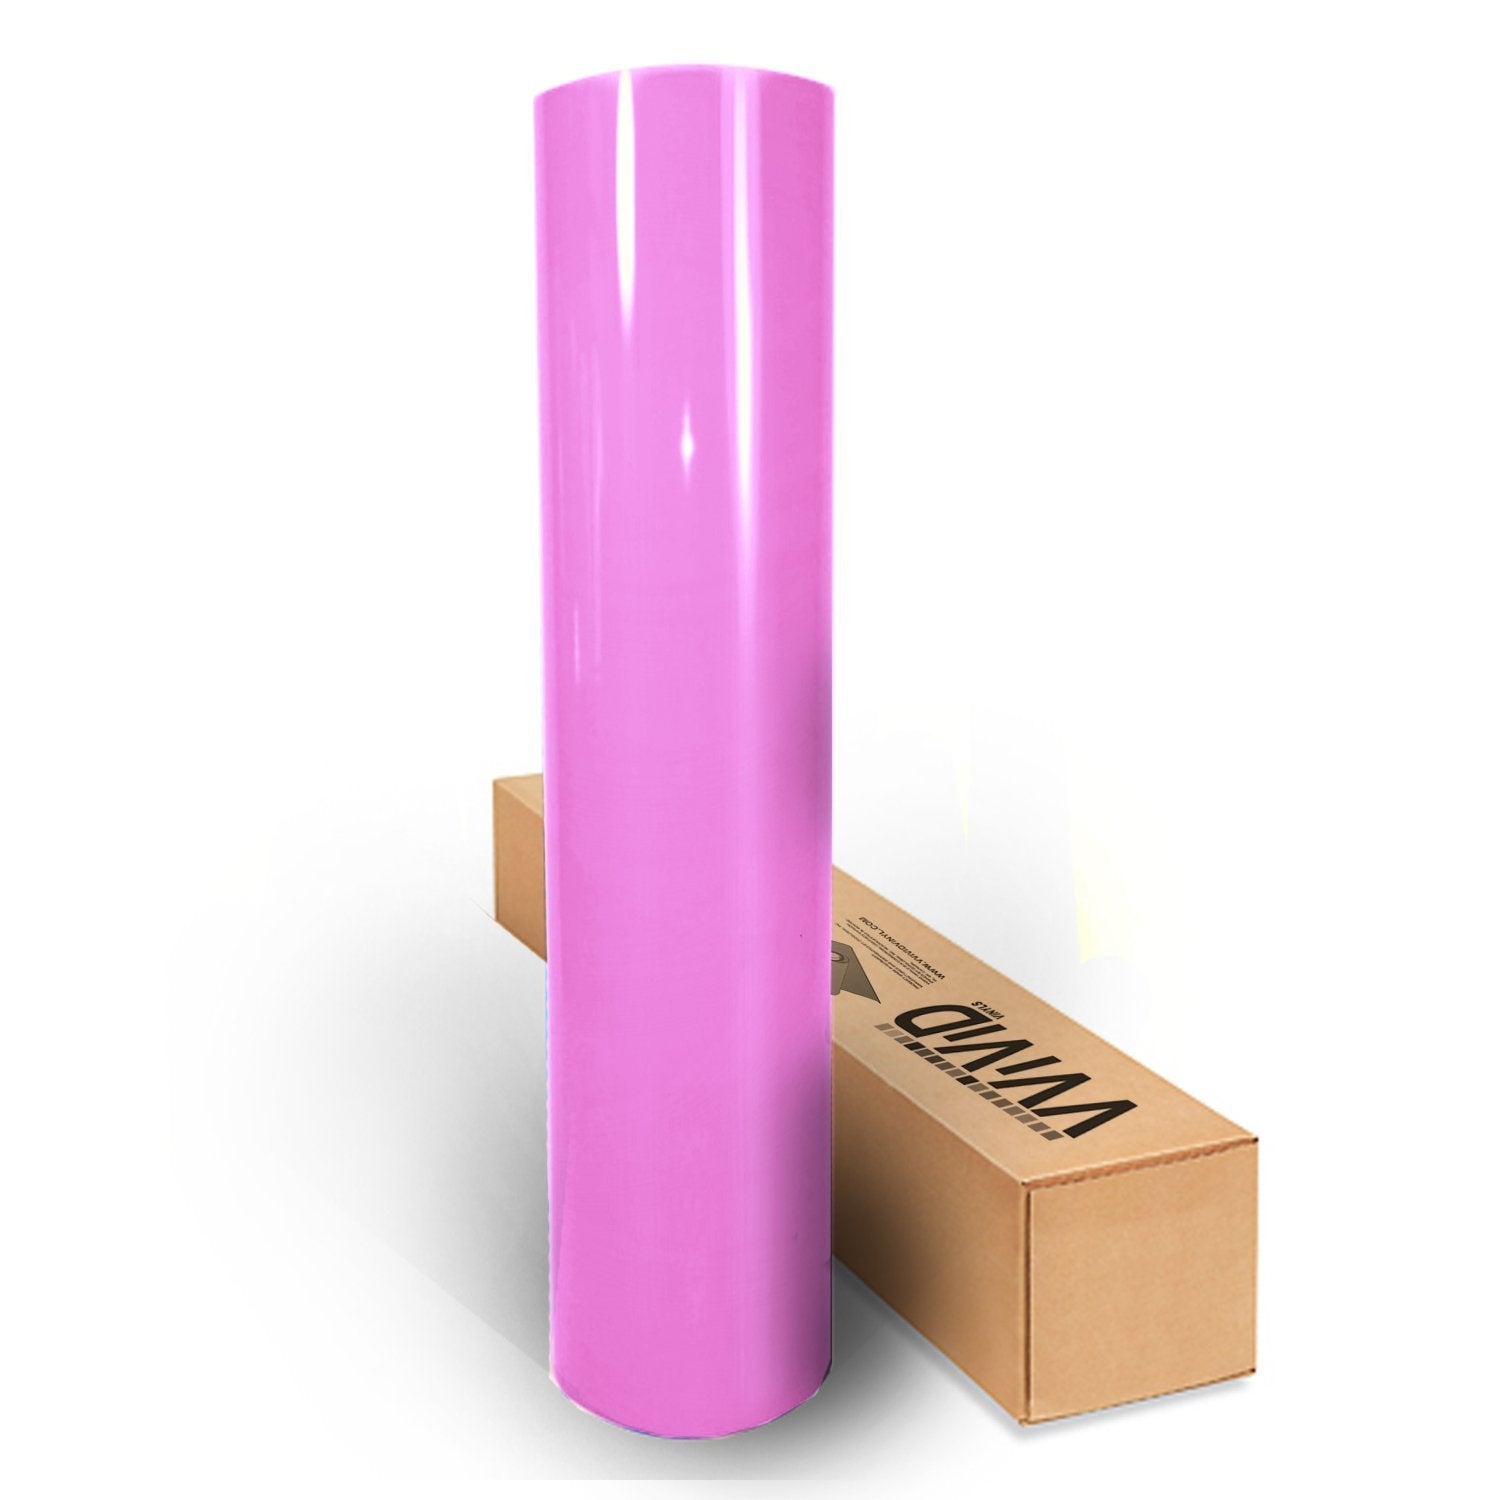 Pink High Gloss Realistic Paint-Like Microfinish Vinyl Wrap Roll with VViViD XPO Air Release Technology - 3ft x 5ft